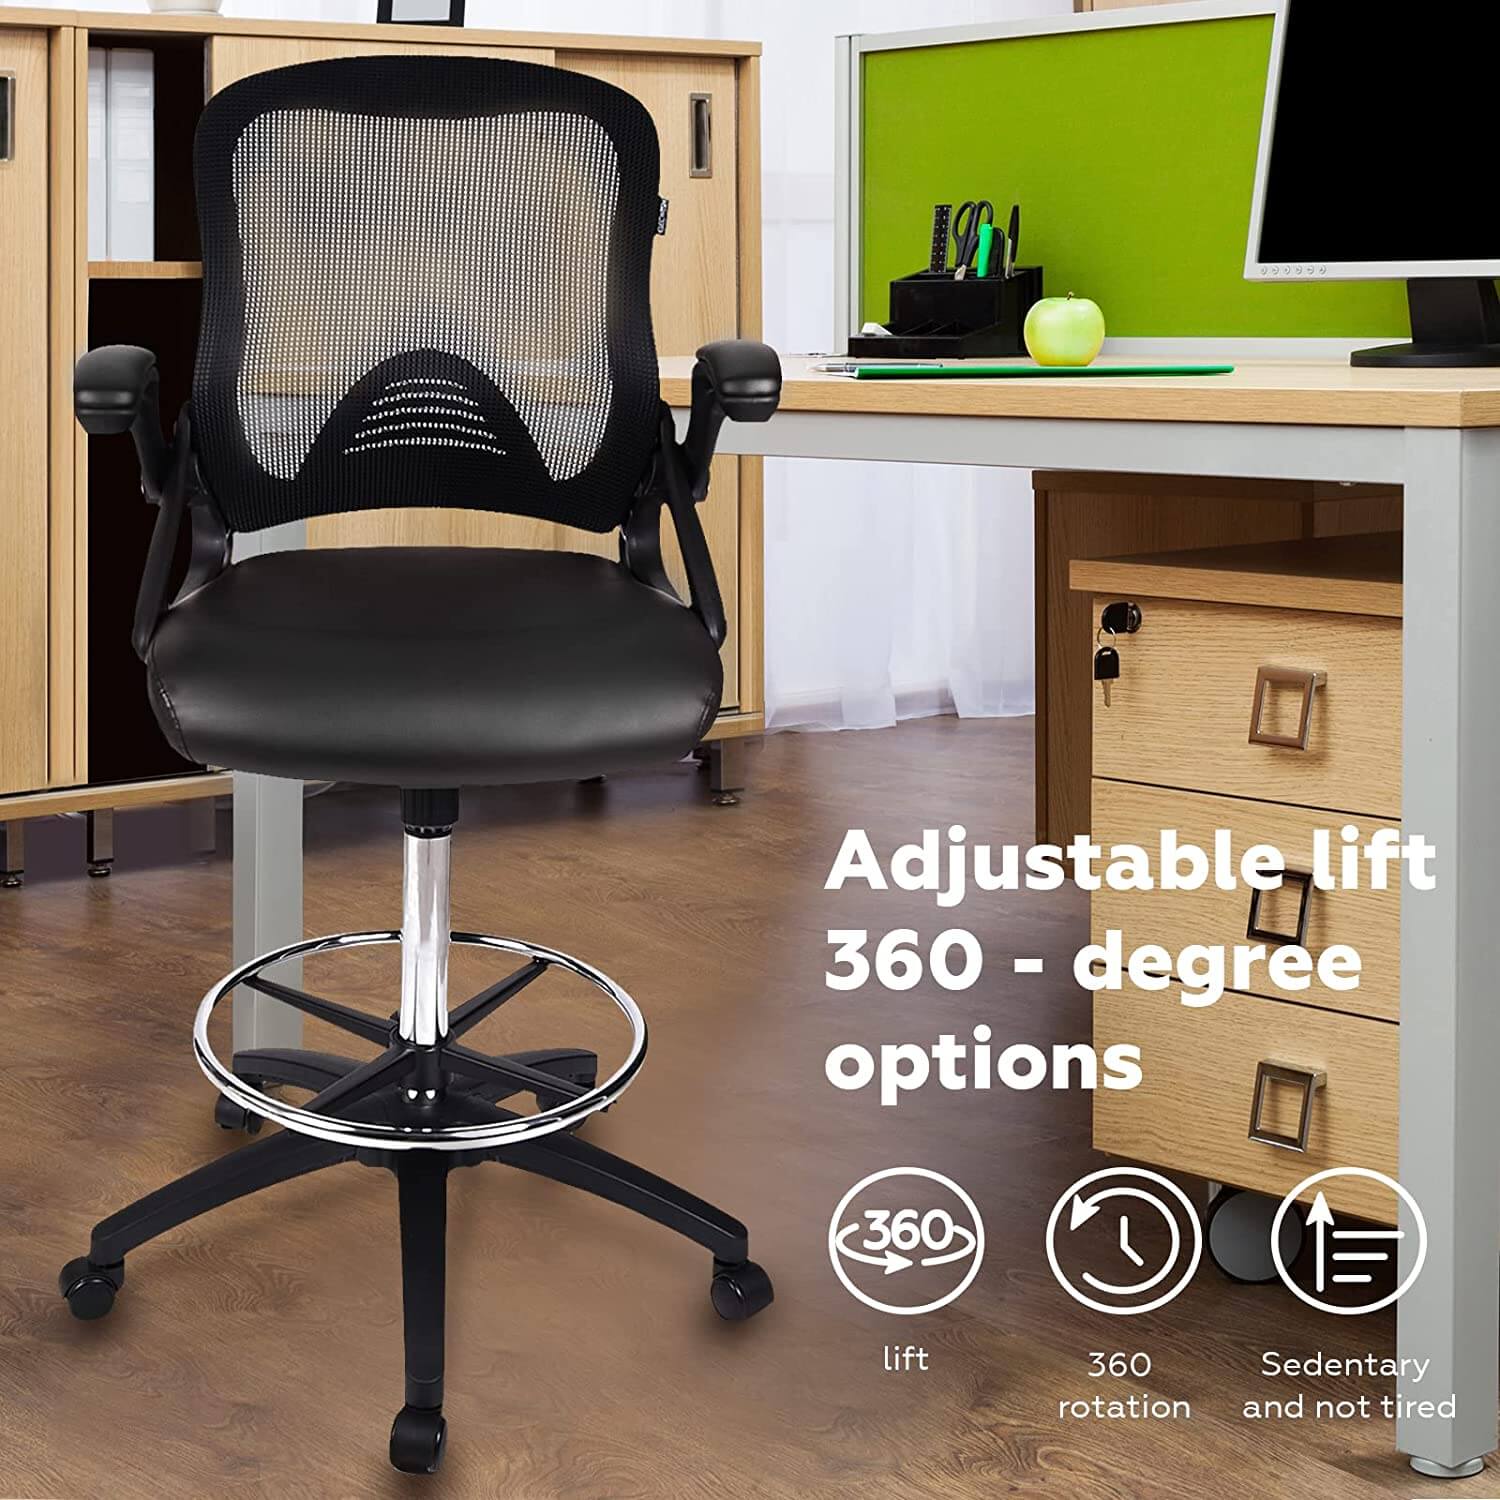 Elecwish Drafting Chairs Drafting Chair OC09 has adjustable lift and 360 degree options